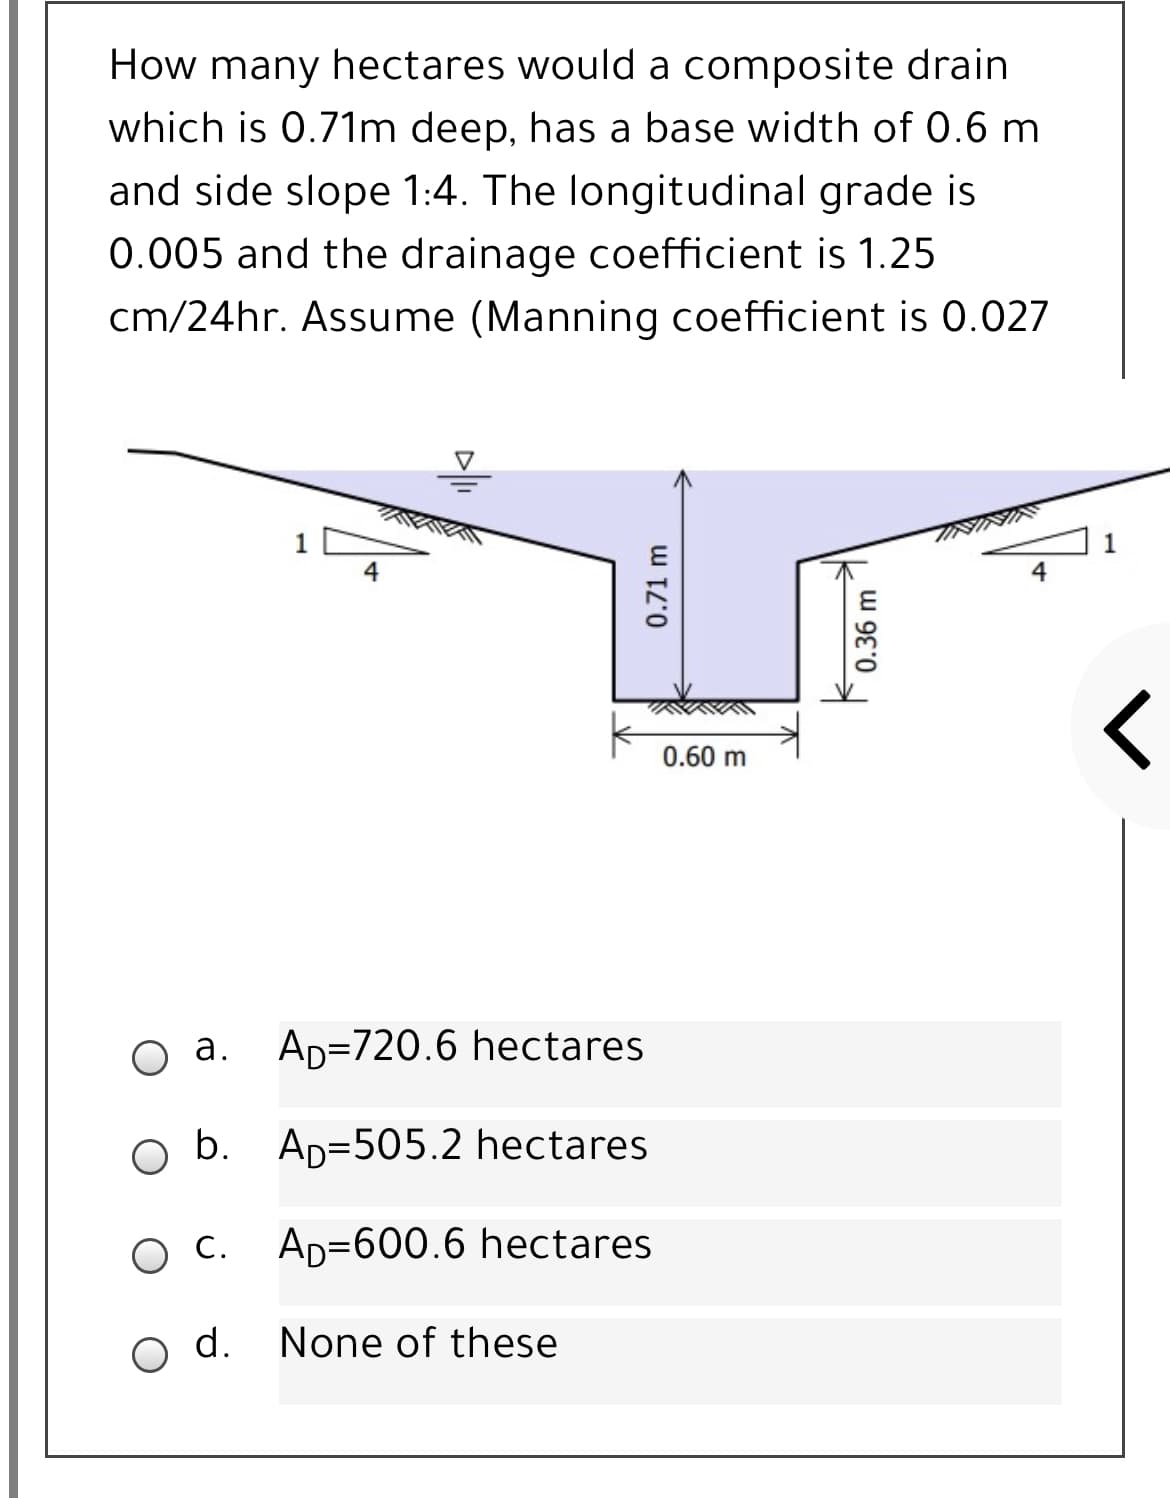 How many hectares would a composite drain
which is 0.71m deep, has a base width of 0.6 m
and side slope 1:4. The longitudinal grade is
0.005 and the drainage coefficient is 1.25
cm/24hr. Assume (Manning coefficient is 0.027
1
1
4
0.60 m
а.
Ap=720.6 hectares
O b. Ap=505.2 hectares
О.
Ap=600.6 hectares
d.
None of these
0.71 m
0.36 m
